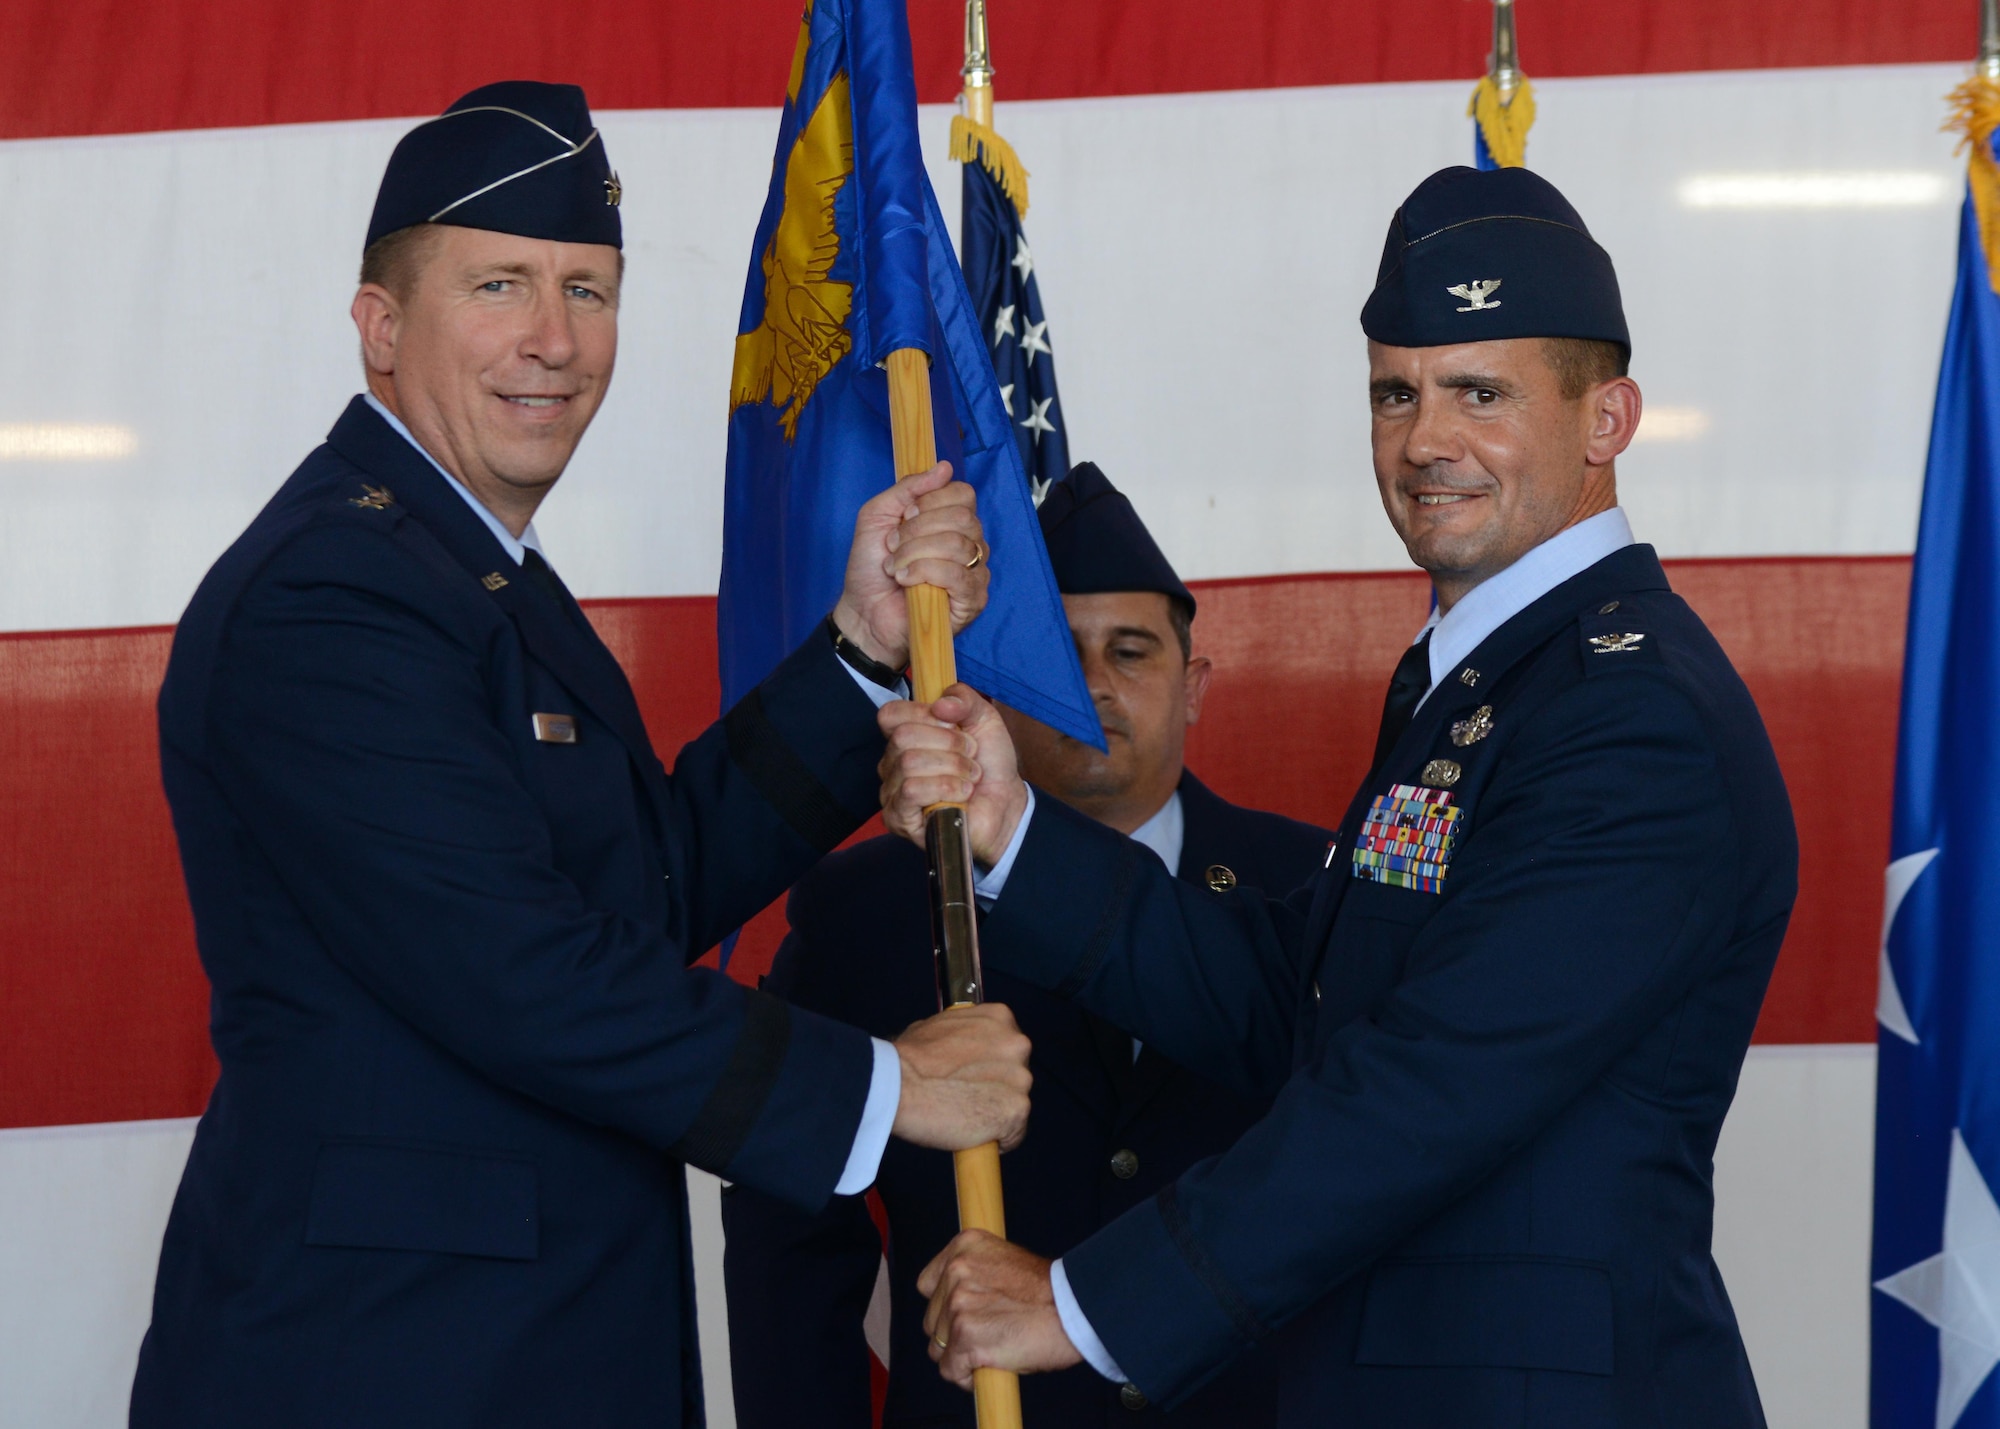 U.S. Air Force Major General Patrick Doherty, 19th Air Force commander, presents the guideon to Col. Charles Velino, incoming 47th Flying Training Wing commander, during the wing’s change of command ceremony at Laughlin Air Force Base, Tx., June 28, 2017. Prior to taking command of the 47th FTW, Velino served as the 15th Operations Group commander at Joint Base Pearl Harbor-Hickam, Hawaii.